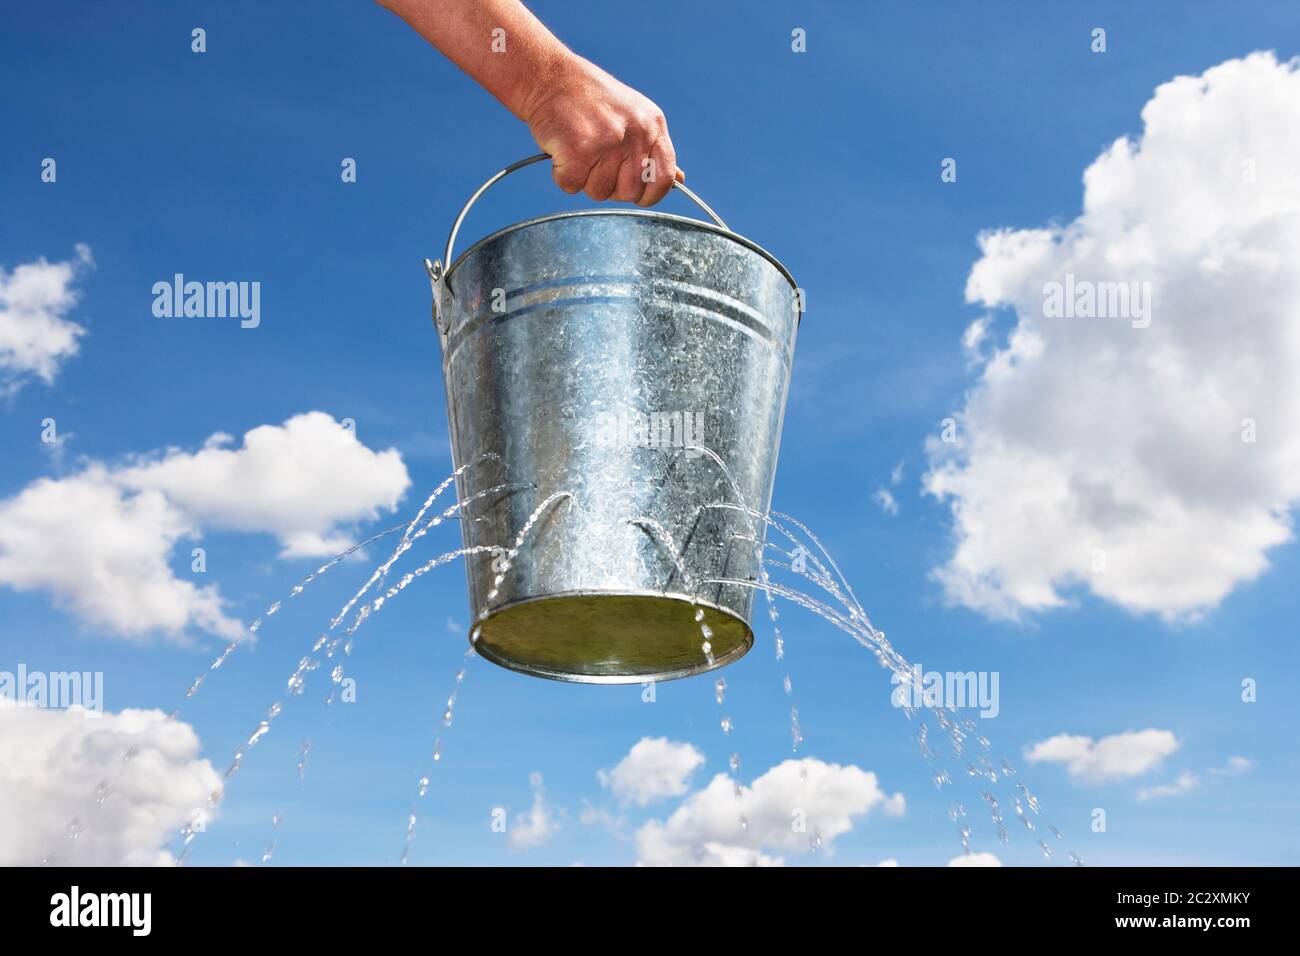 Man holding bucket with holes leaking water Stock Photo